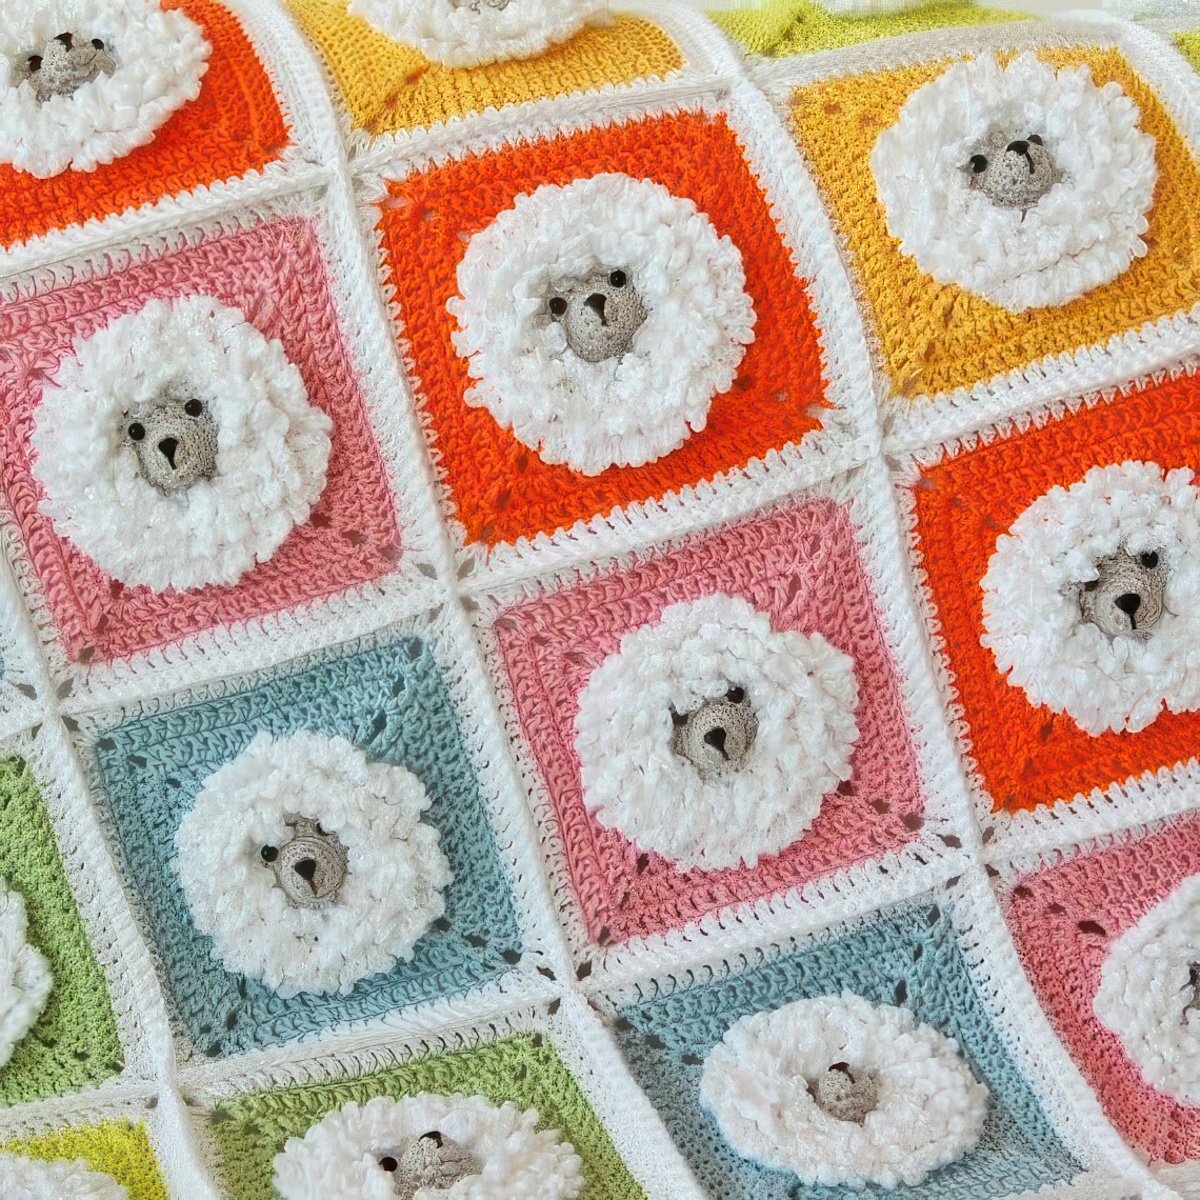 Discover 9 unique granny square baby blanket patterns that are both easy to make and irresistibly cute! Ideal for adding a handmade touch to any nursery. 🐣🌟 #CrochetLove #BabyCrafts #GrannySquares